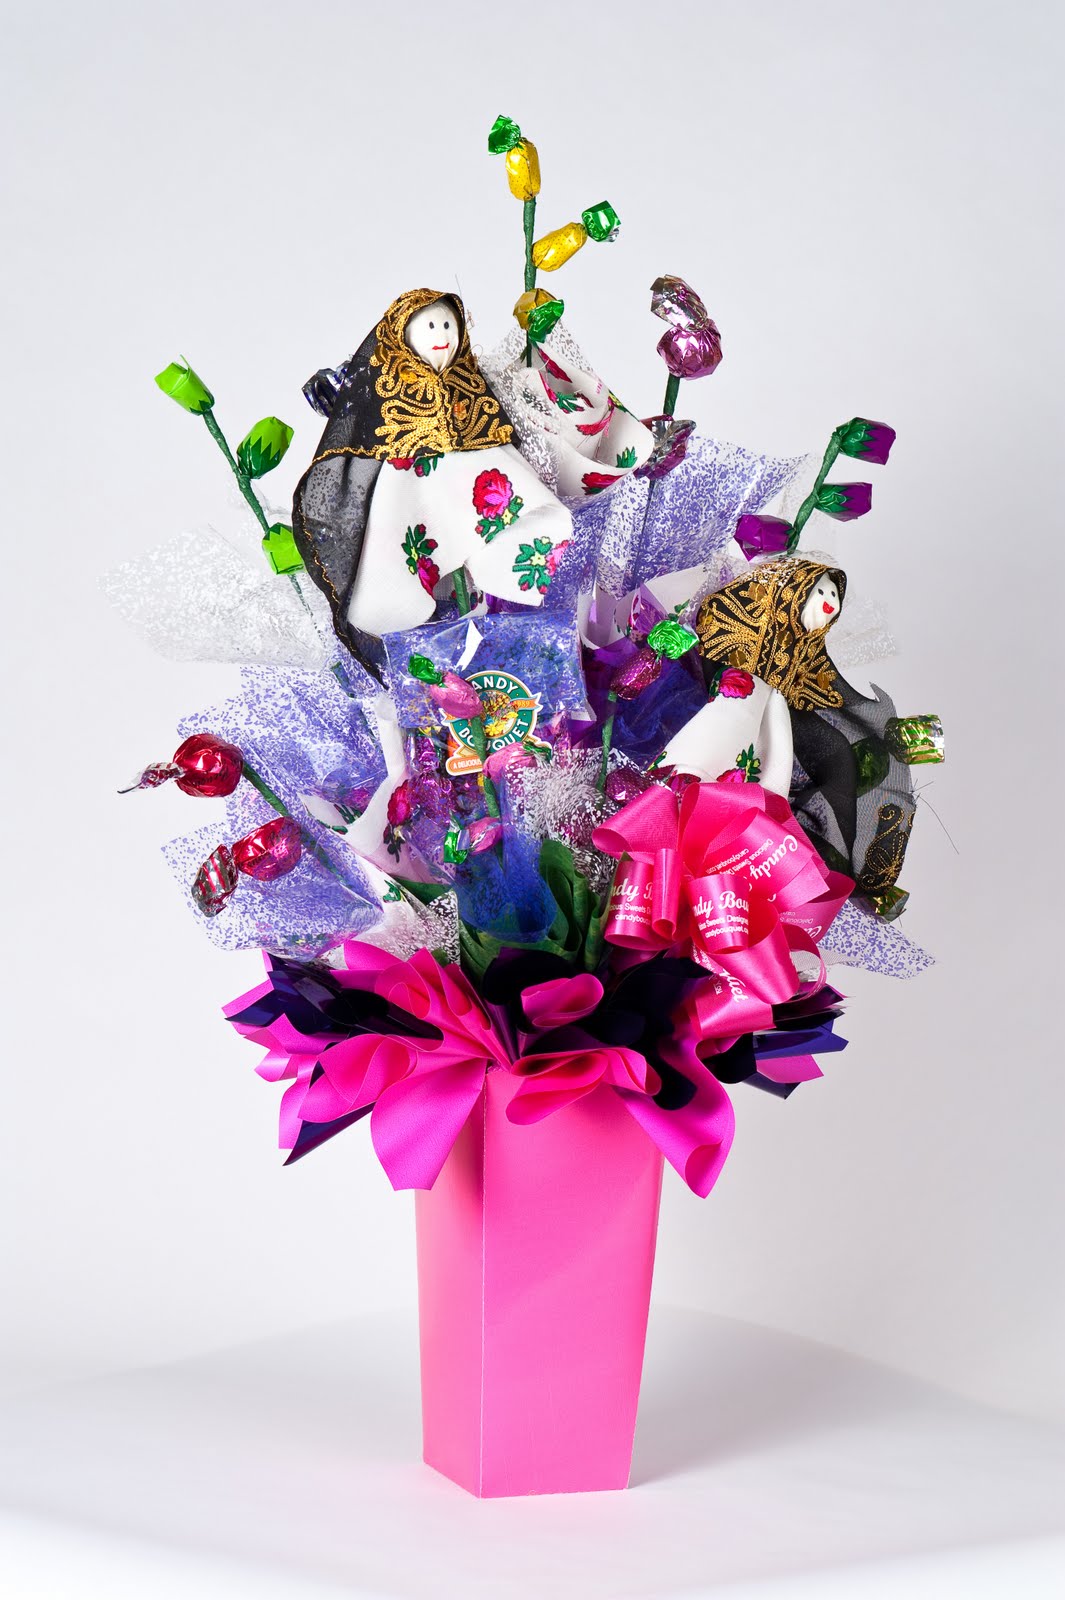 Candy Bouquet Soon In Doha: Grang3o Candy Bouquet